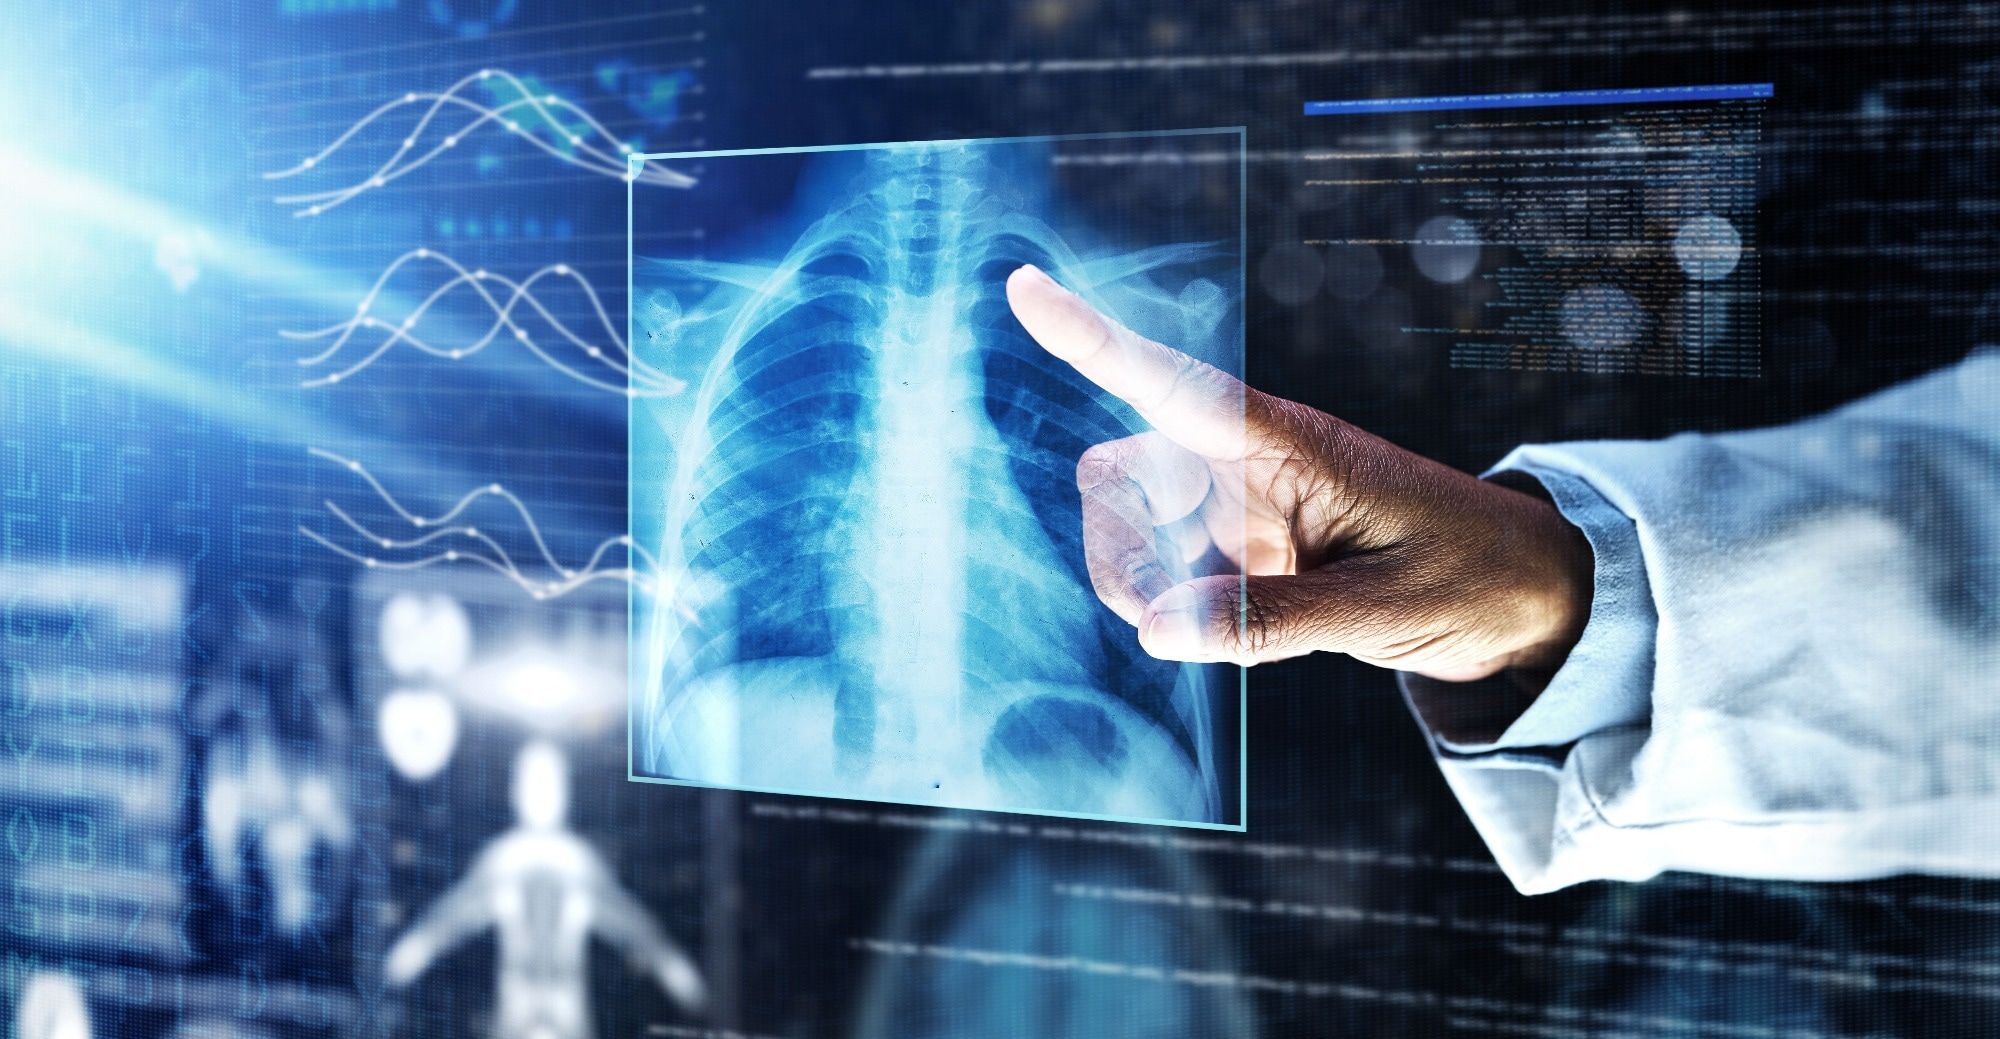 Study: Measuring the Impact of AI in the Diagnosis of Hospitalized Patients A Randomized Clinical Vignette Survey Study. Image Credit: PeopleImages.com - Yuri A / Shutterstock.com